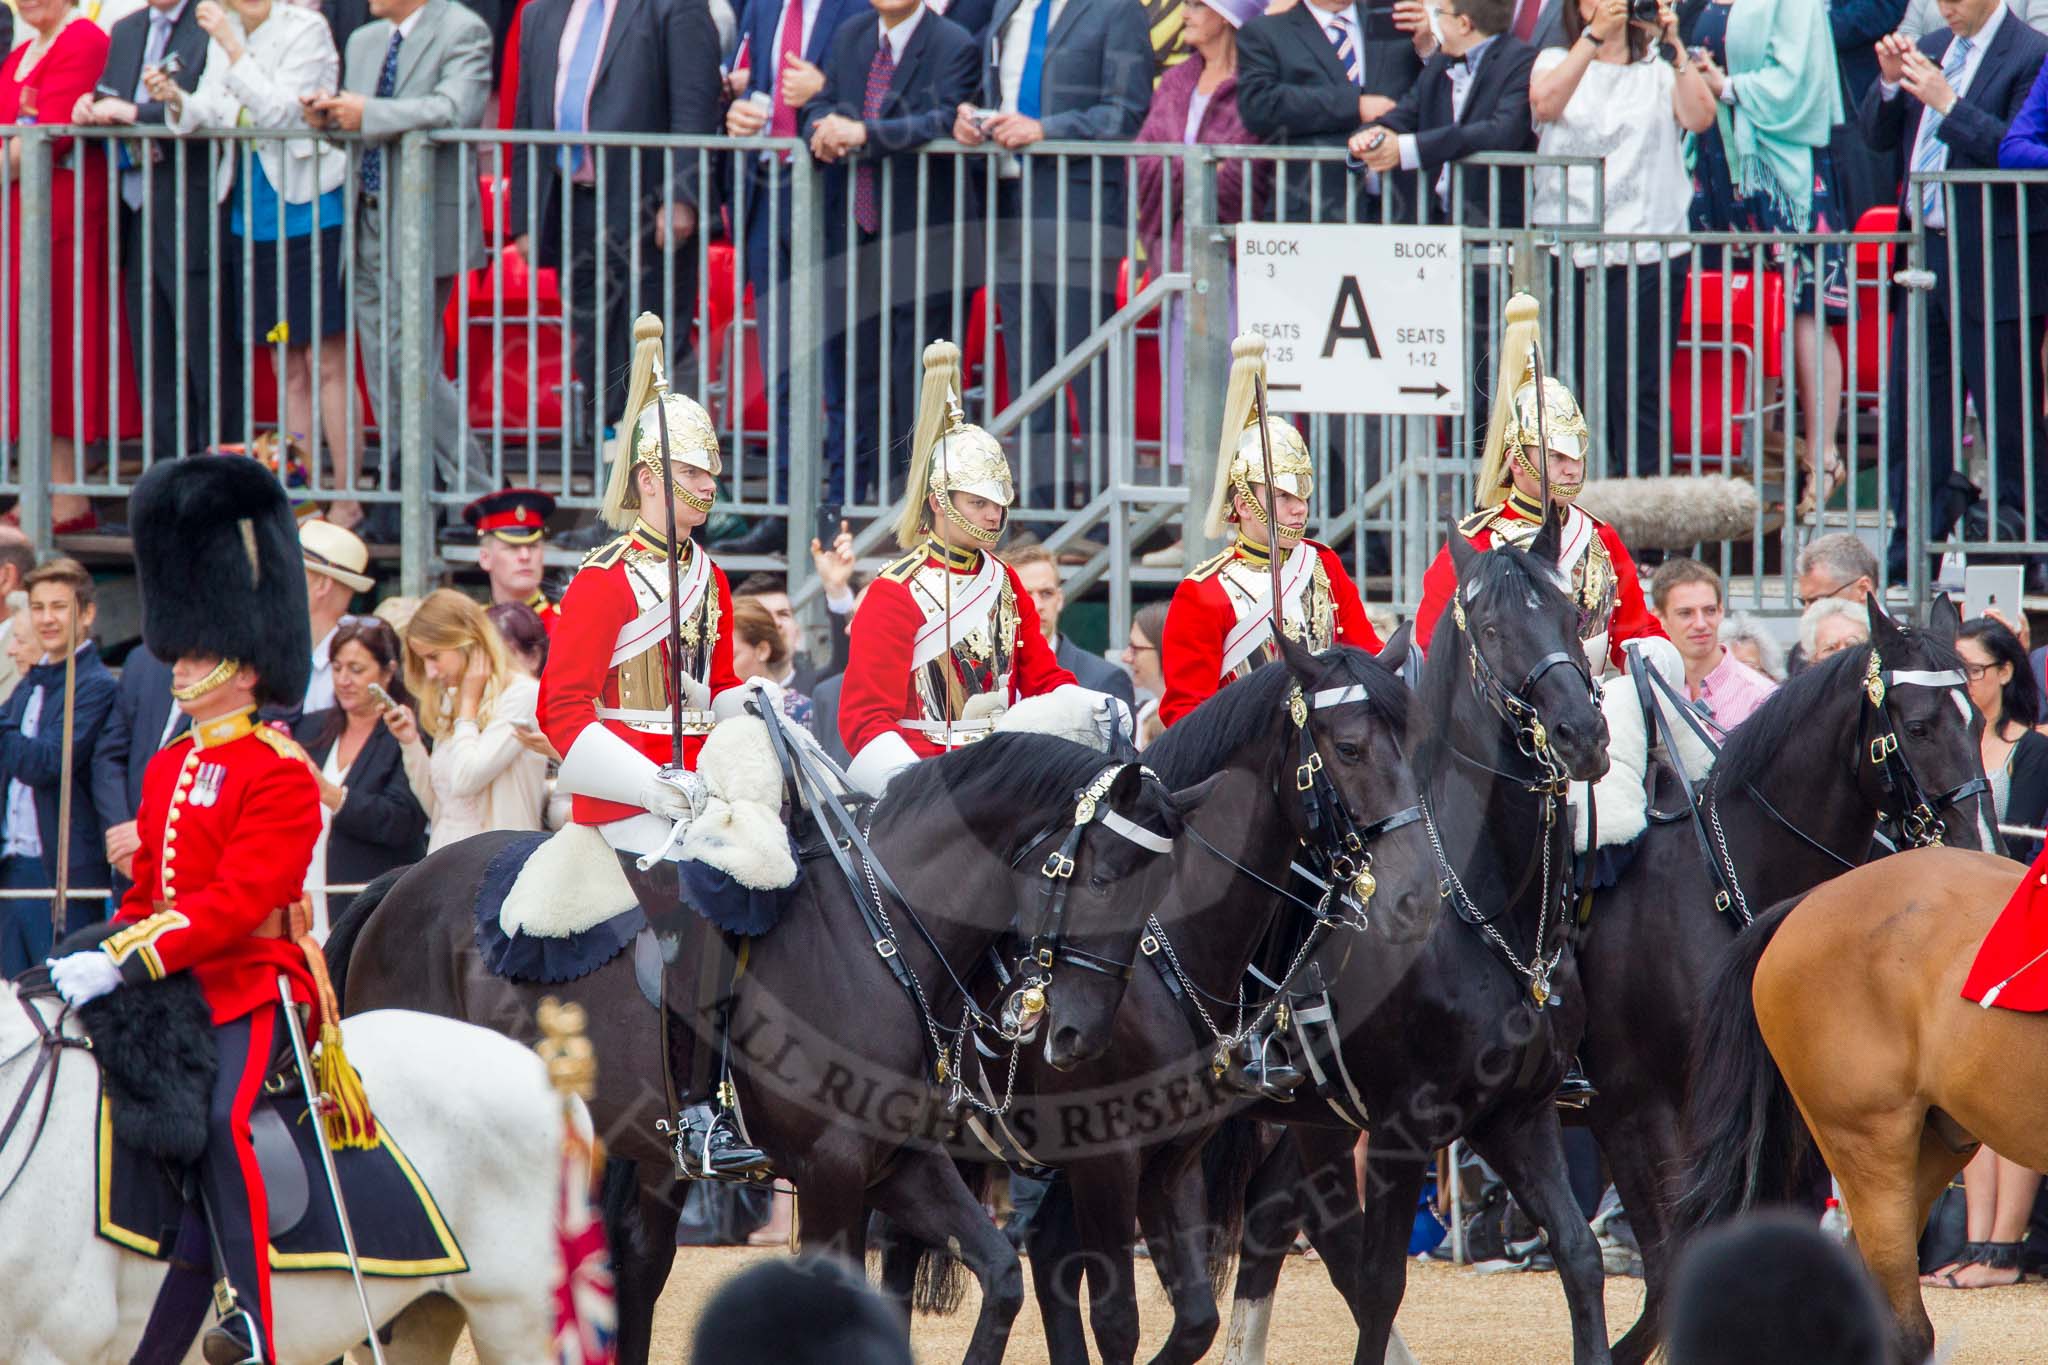 Trooping the Colour 2014.
Horse Guards Parade, Westminster,
London SW1A,

United Kingdom,
on 14 June 2014 at 10:59, image #361